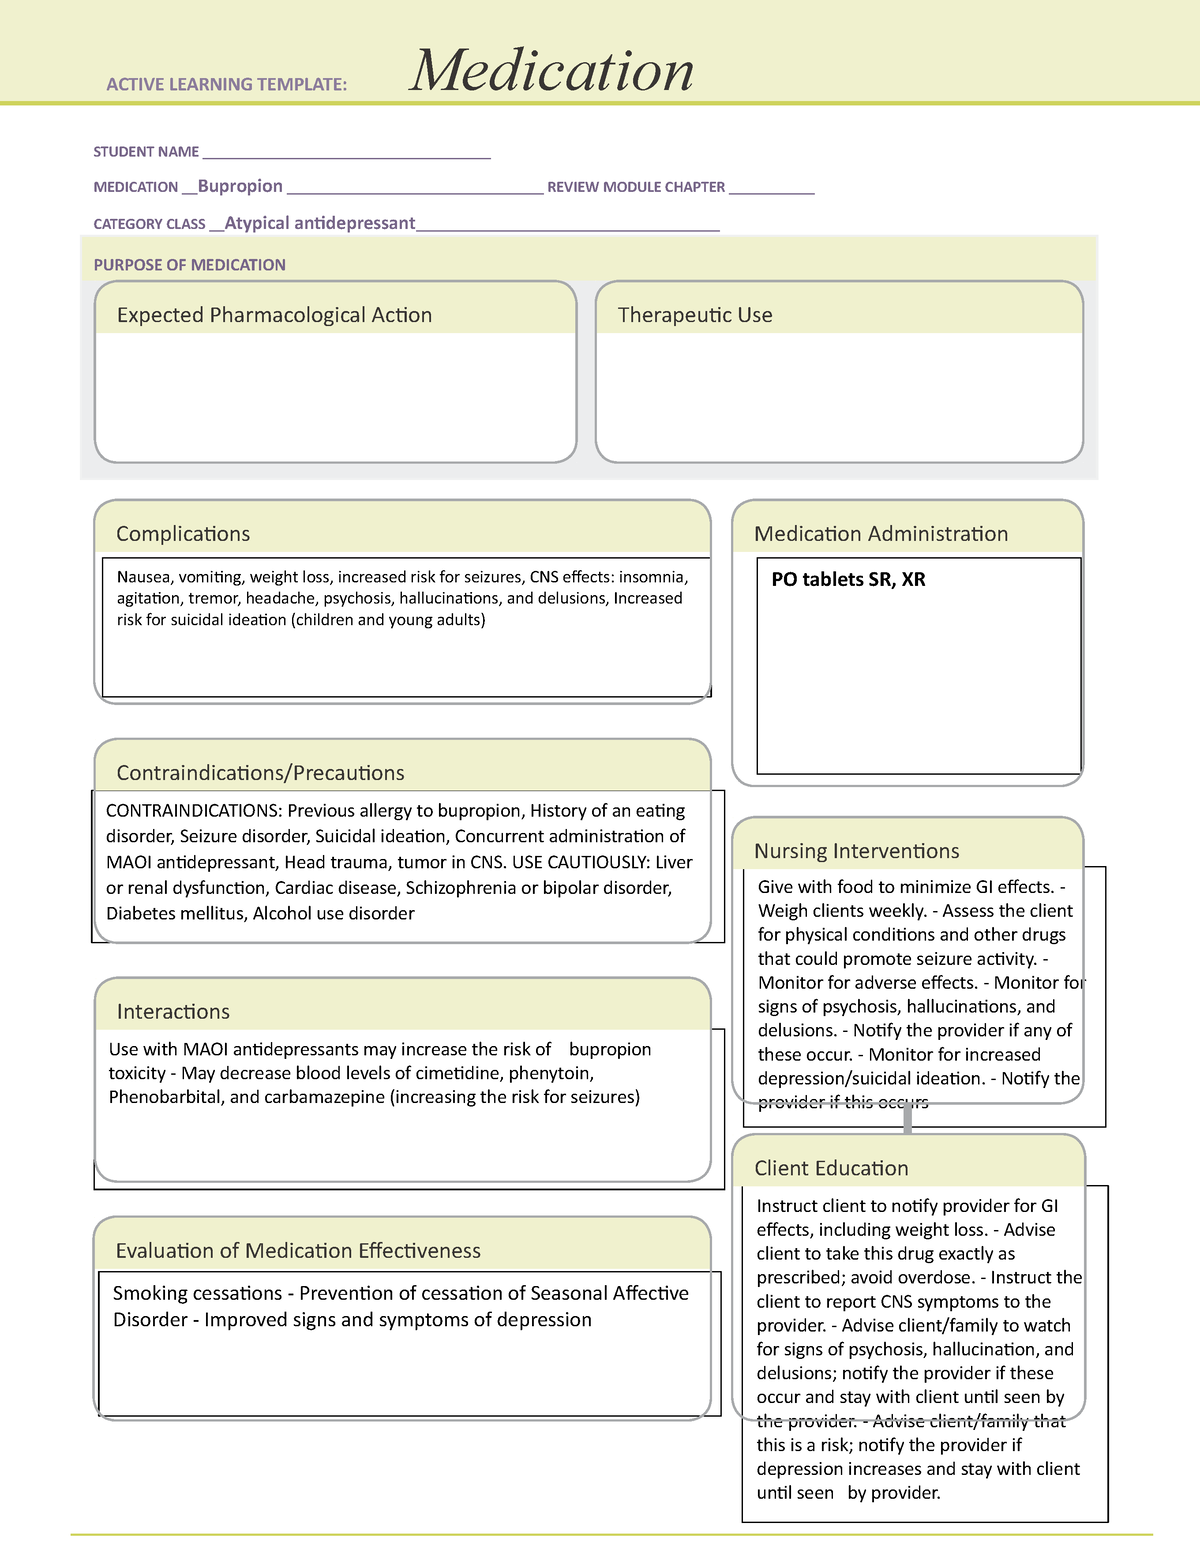 buproprion-ati-medication-template-for-bupropion-for-reference-use